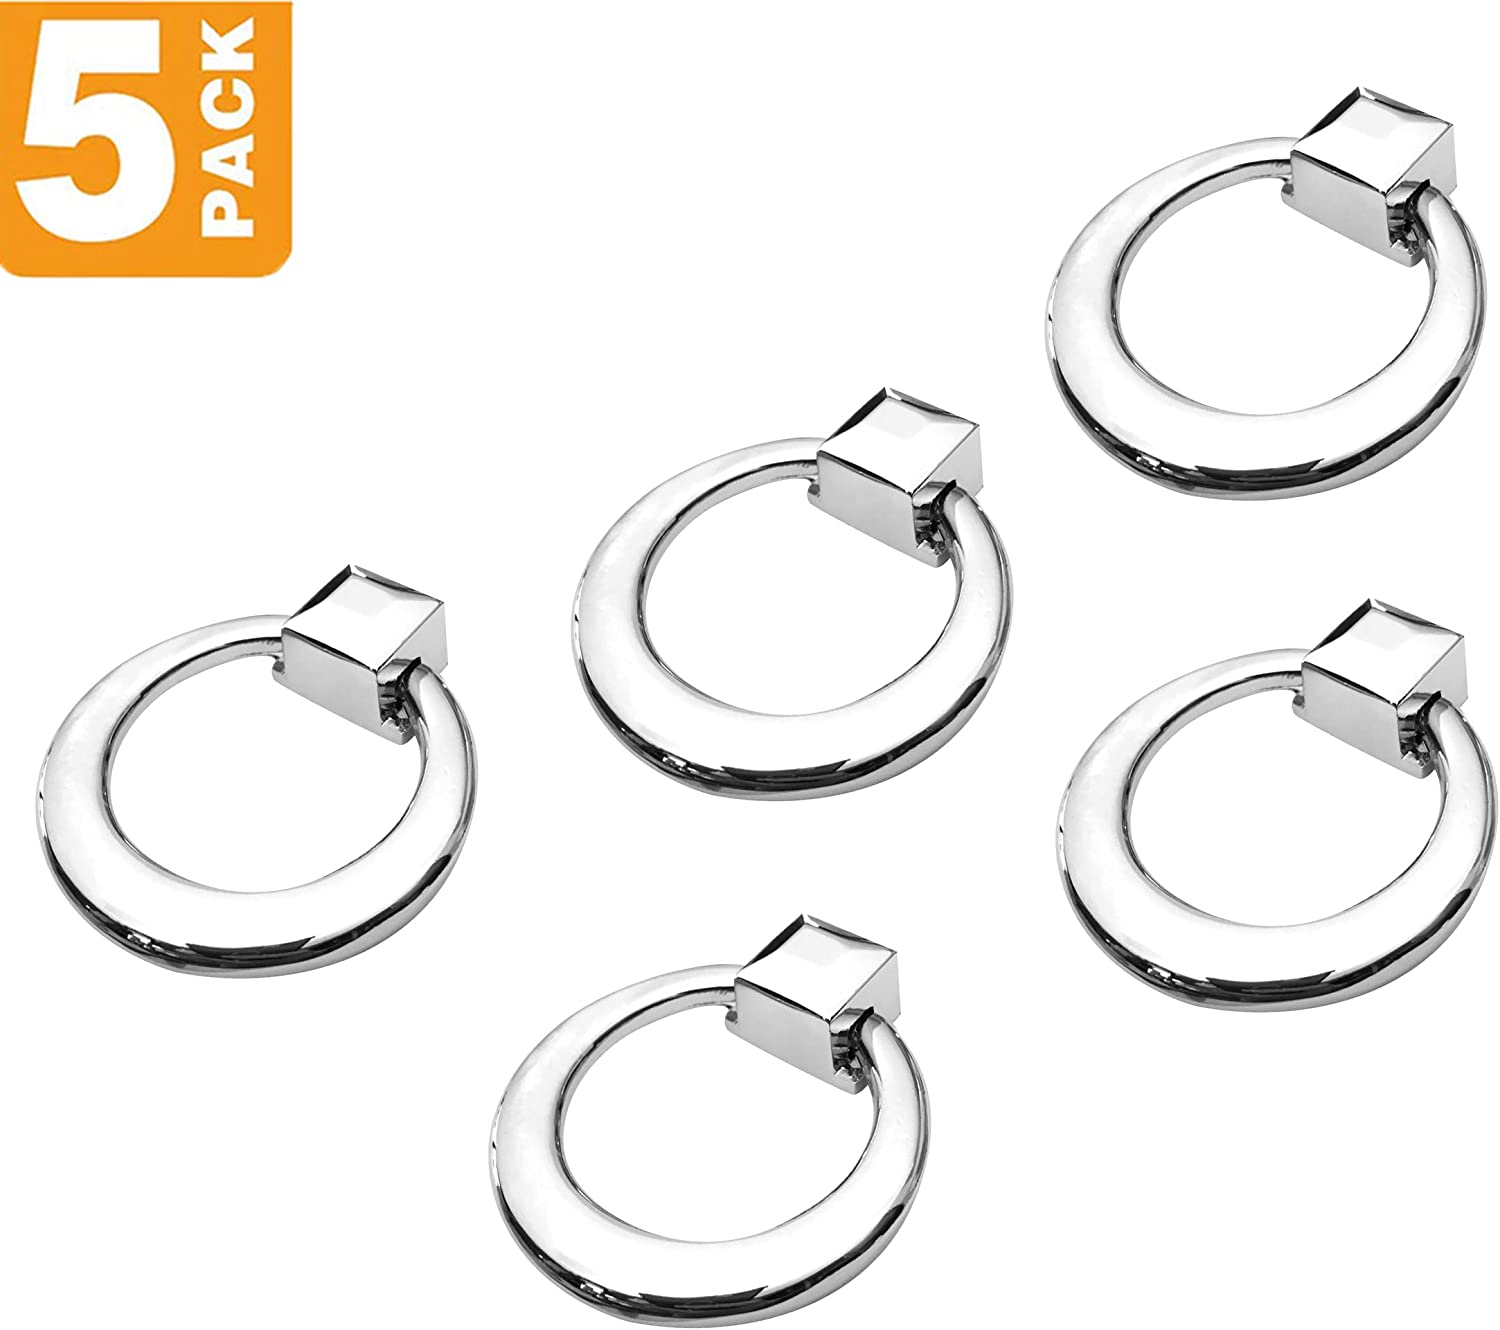 Southern Hills Chrome Ring Pulls, Pack of 5 Drawer Pulls, Cabinet Door Pulls, Cabinet Drawer Pulls, Polished Chrome Ring Pulls Perfect for Kitchen and Bath Cabinets and Furniture. SHKM3282-CHR-5 - image 3 of 5